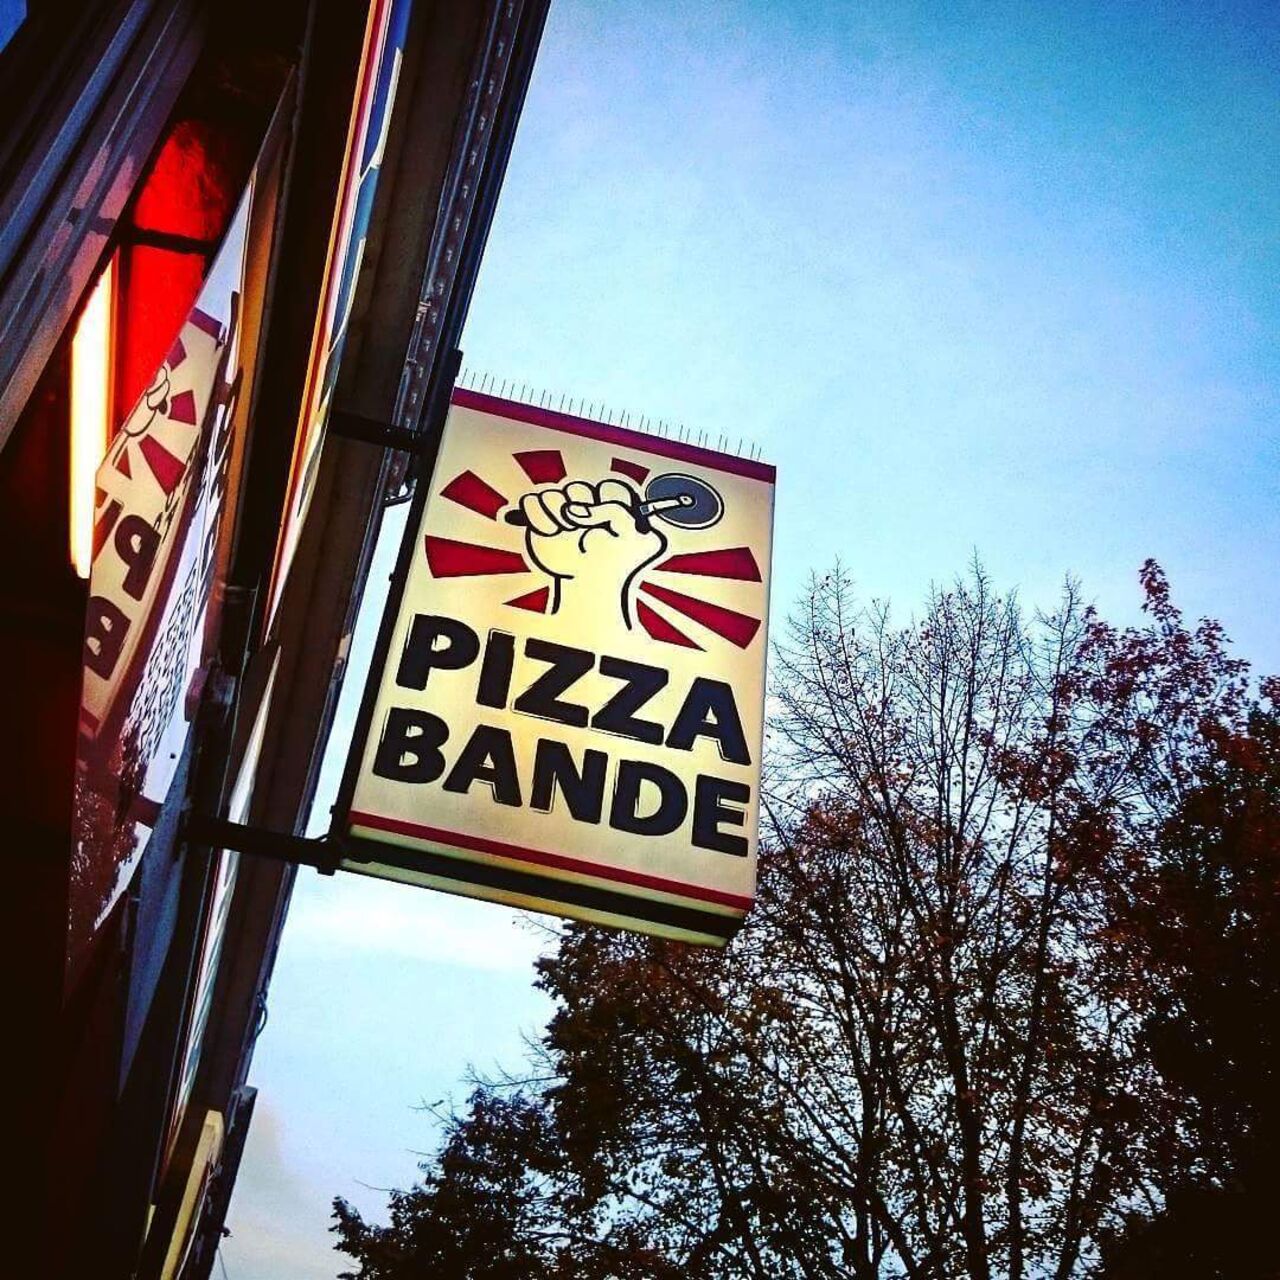 A photo of Pizza Bande